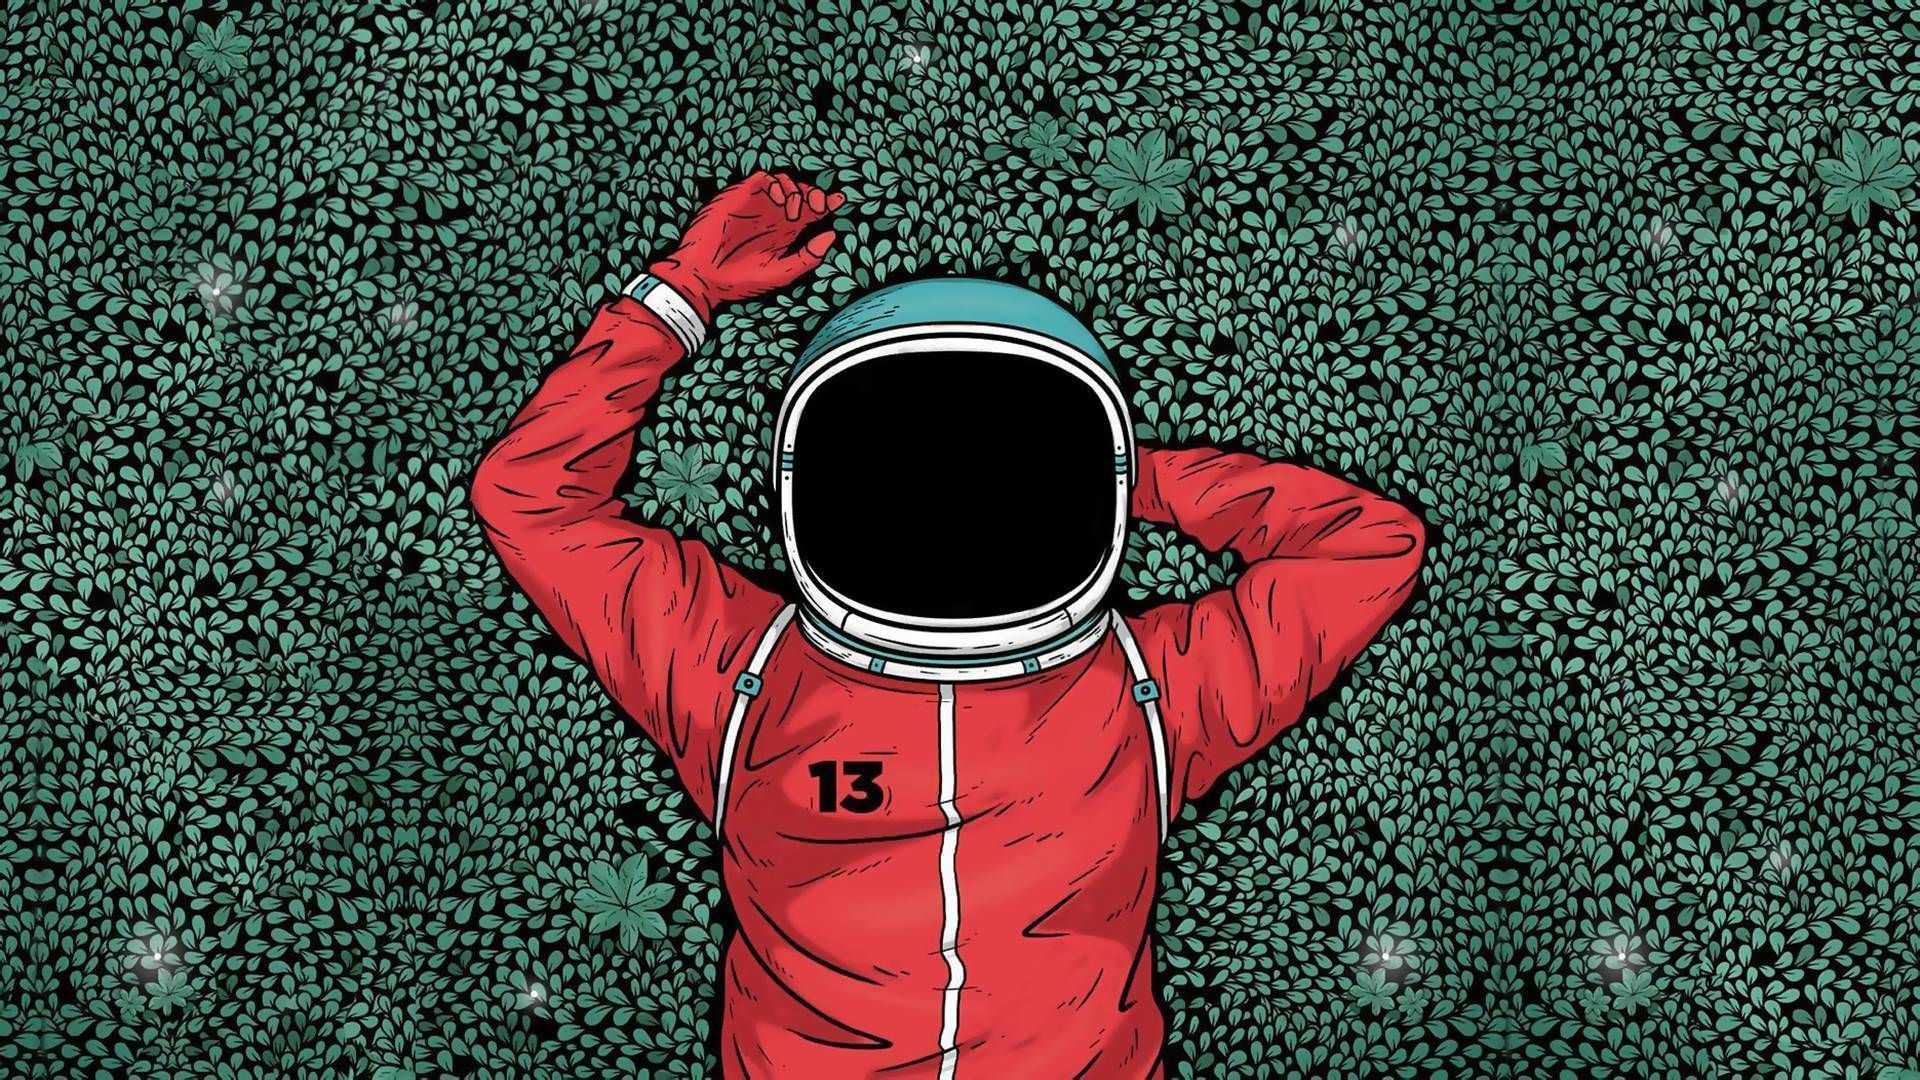 An astronaut is standing in a field of green plants - Astronaut